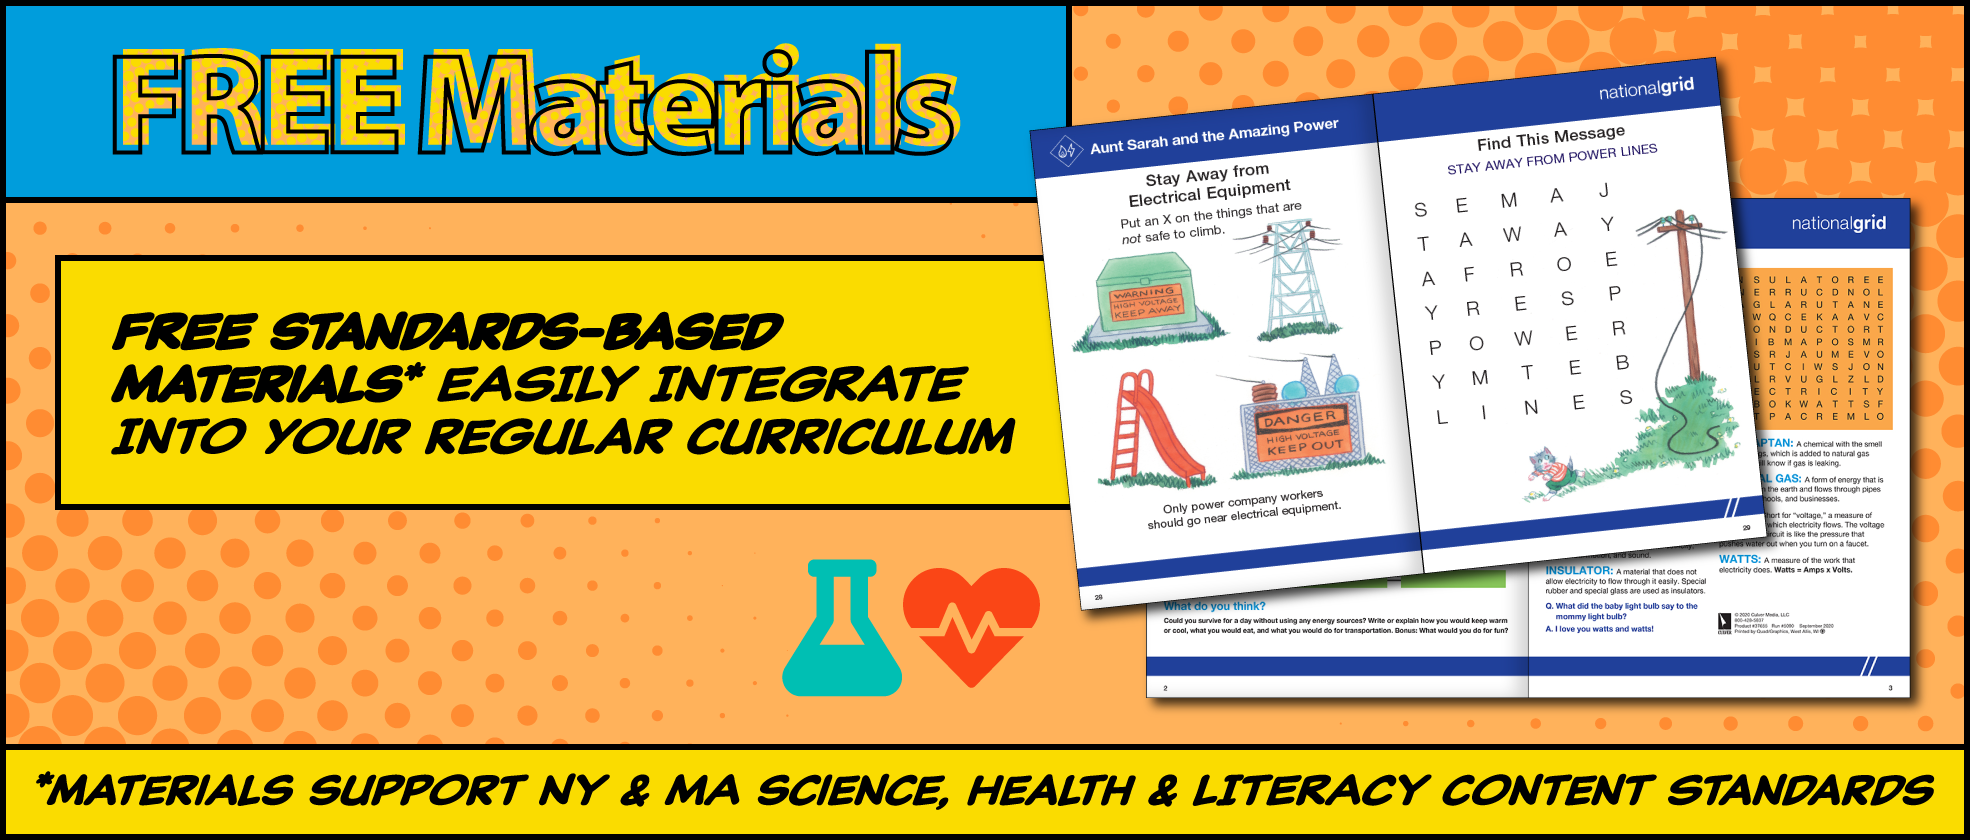 Free standards-based materials easily integrate into your regular curriculum. Materials support NY and MA Science, Health & Literacy Content Standards